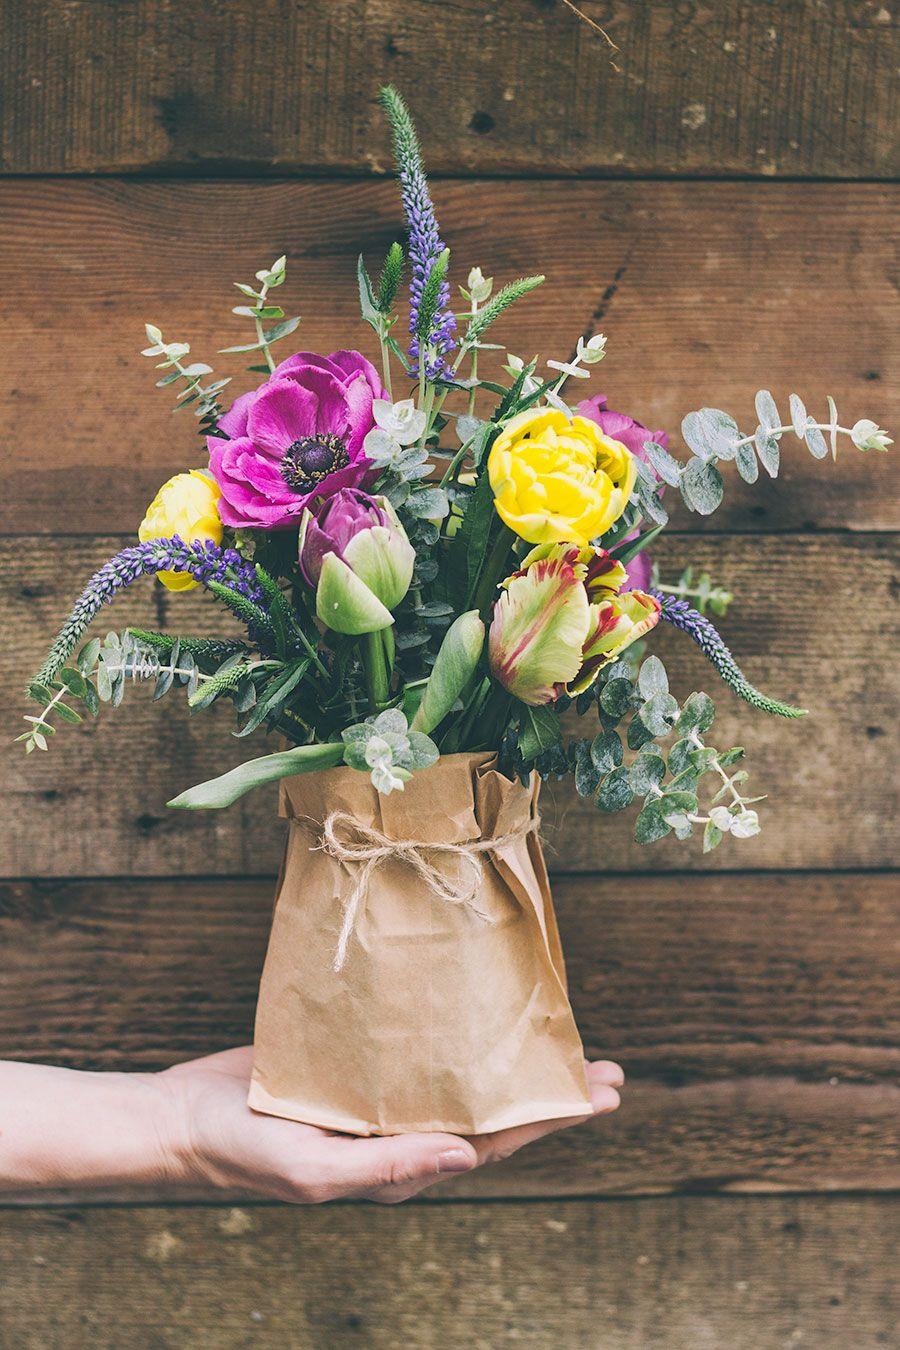 flower delivery no vase of pop beautiful flowers in a paper bag and tie with a small piece of pertaining to pop beautiful flowers in a paper bag and tie with a small piece of string for a vintage touch